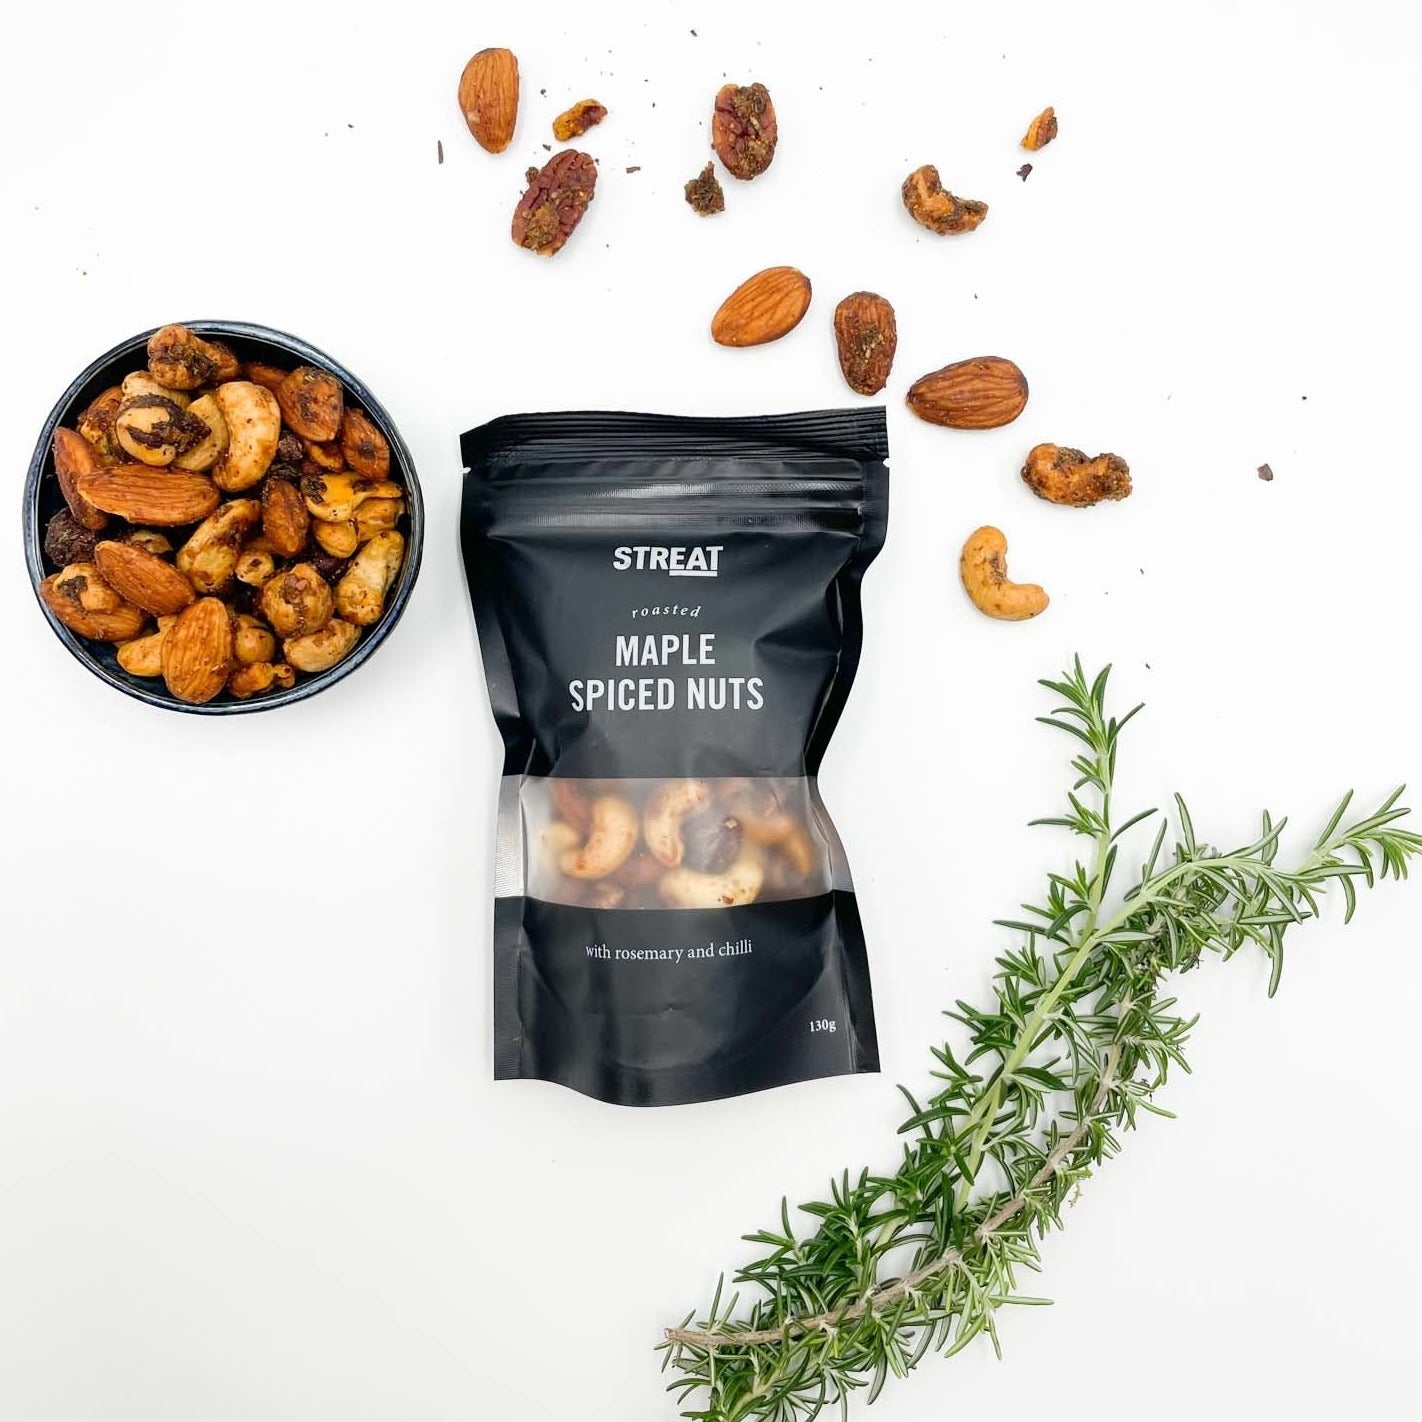 Maple spiced nuts